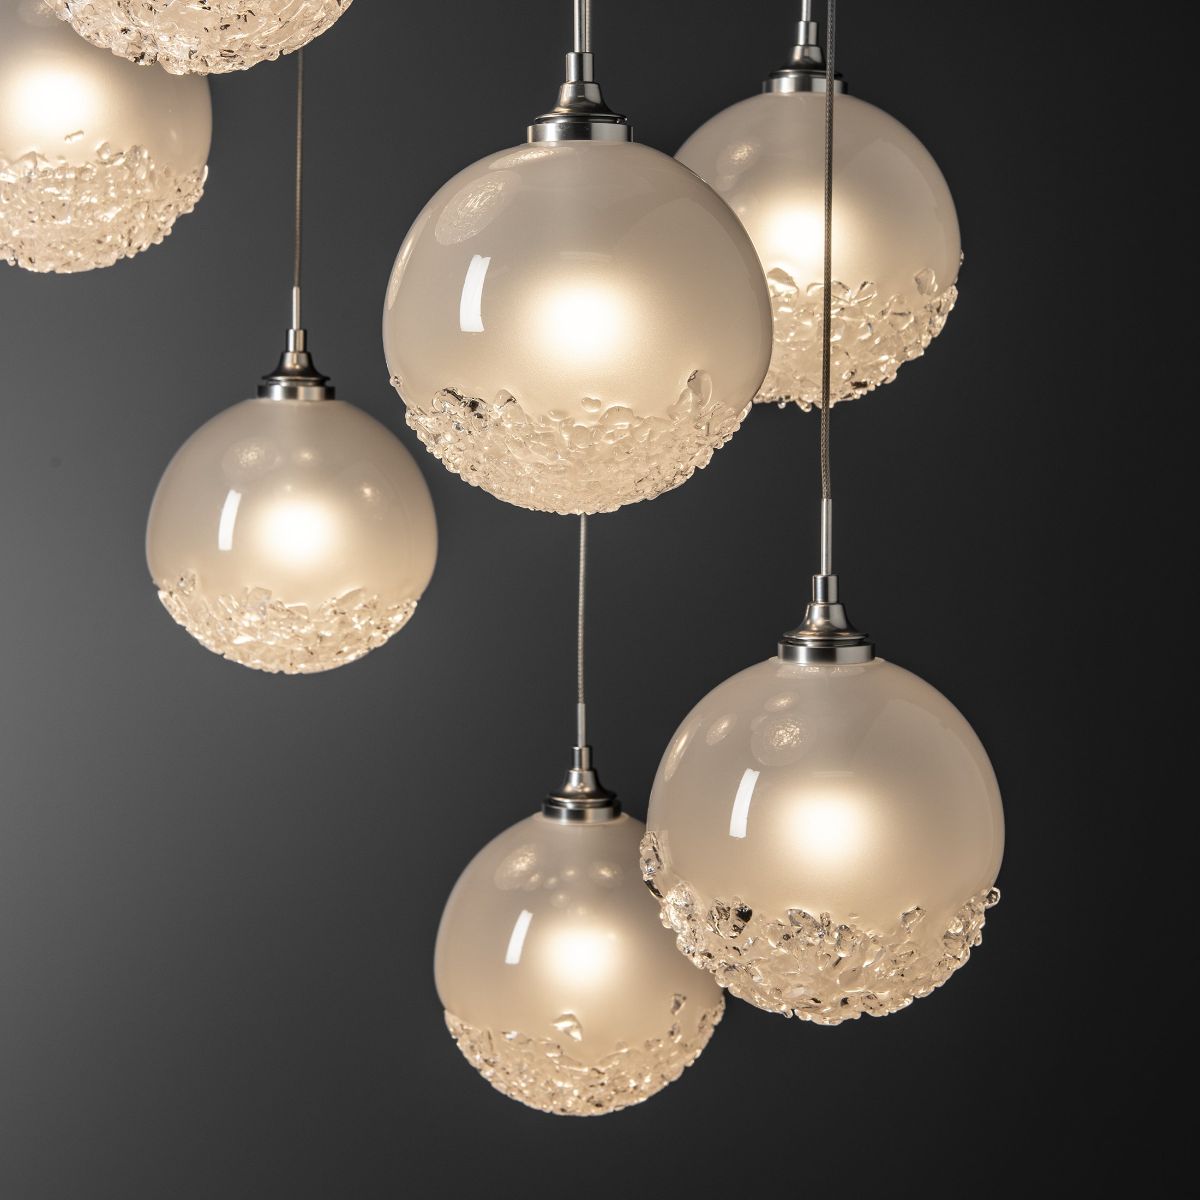 Fritz 21 in. 9 lights Pendant Light with Standard Height